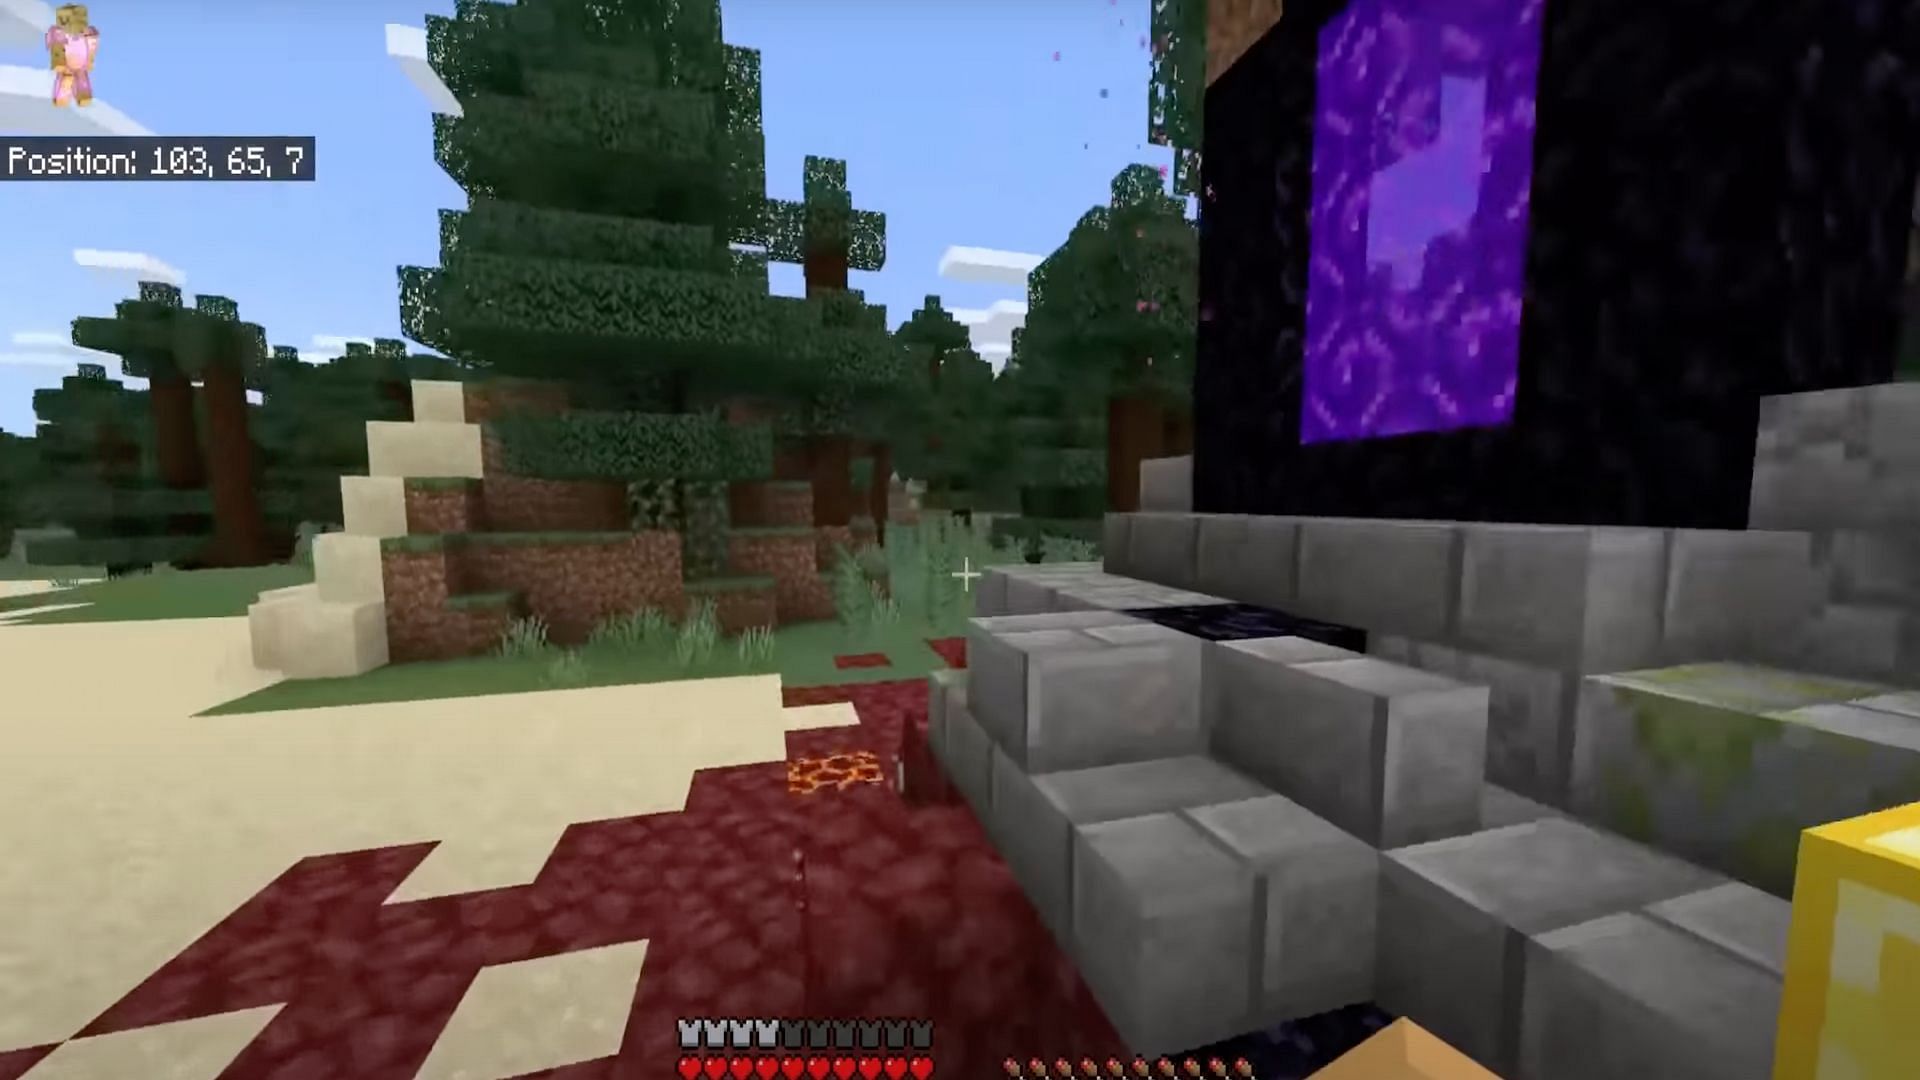 Players can enter seeds to enable them quick access to a nether portal and to easier access points in the Nether (Image via ibxtoycat/YouTube)